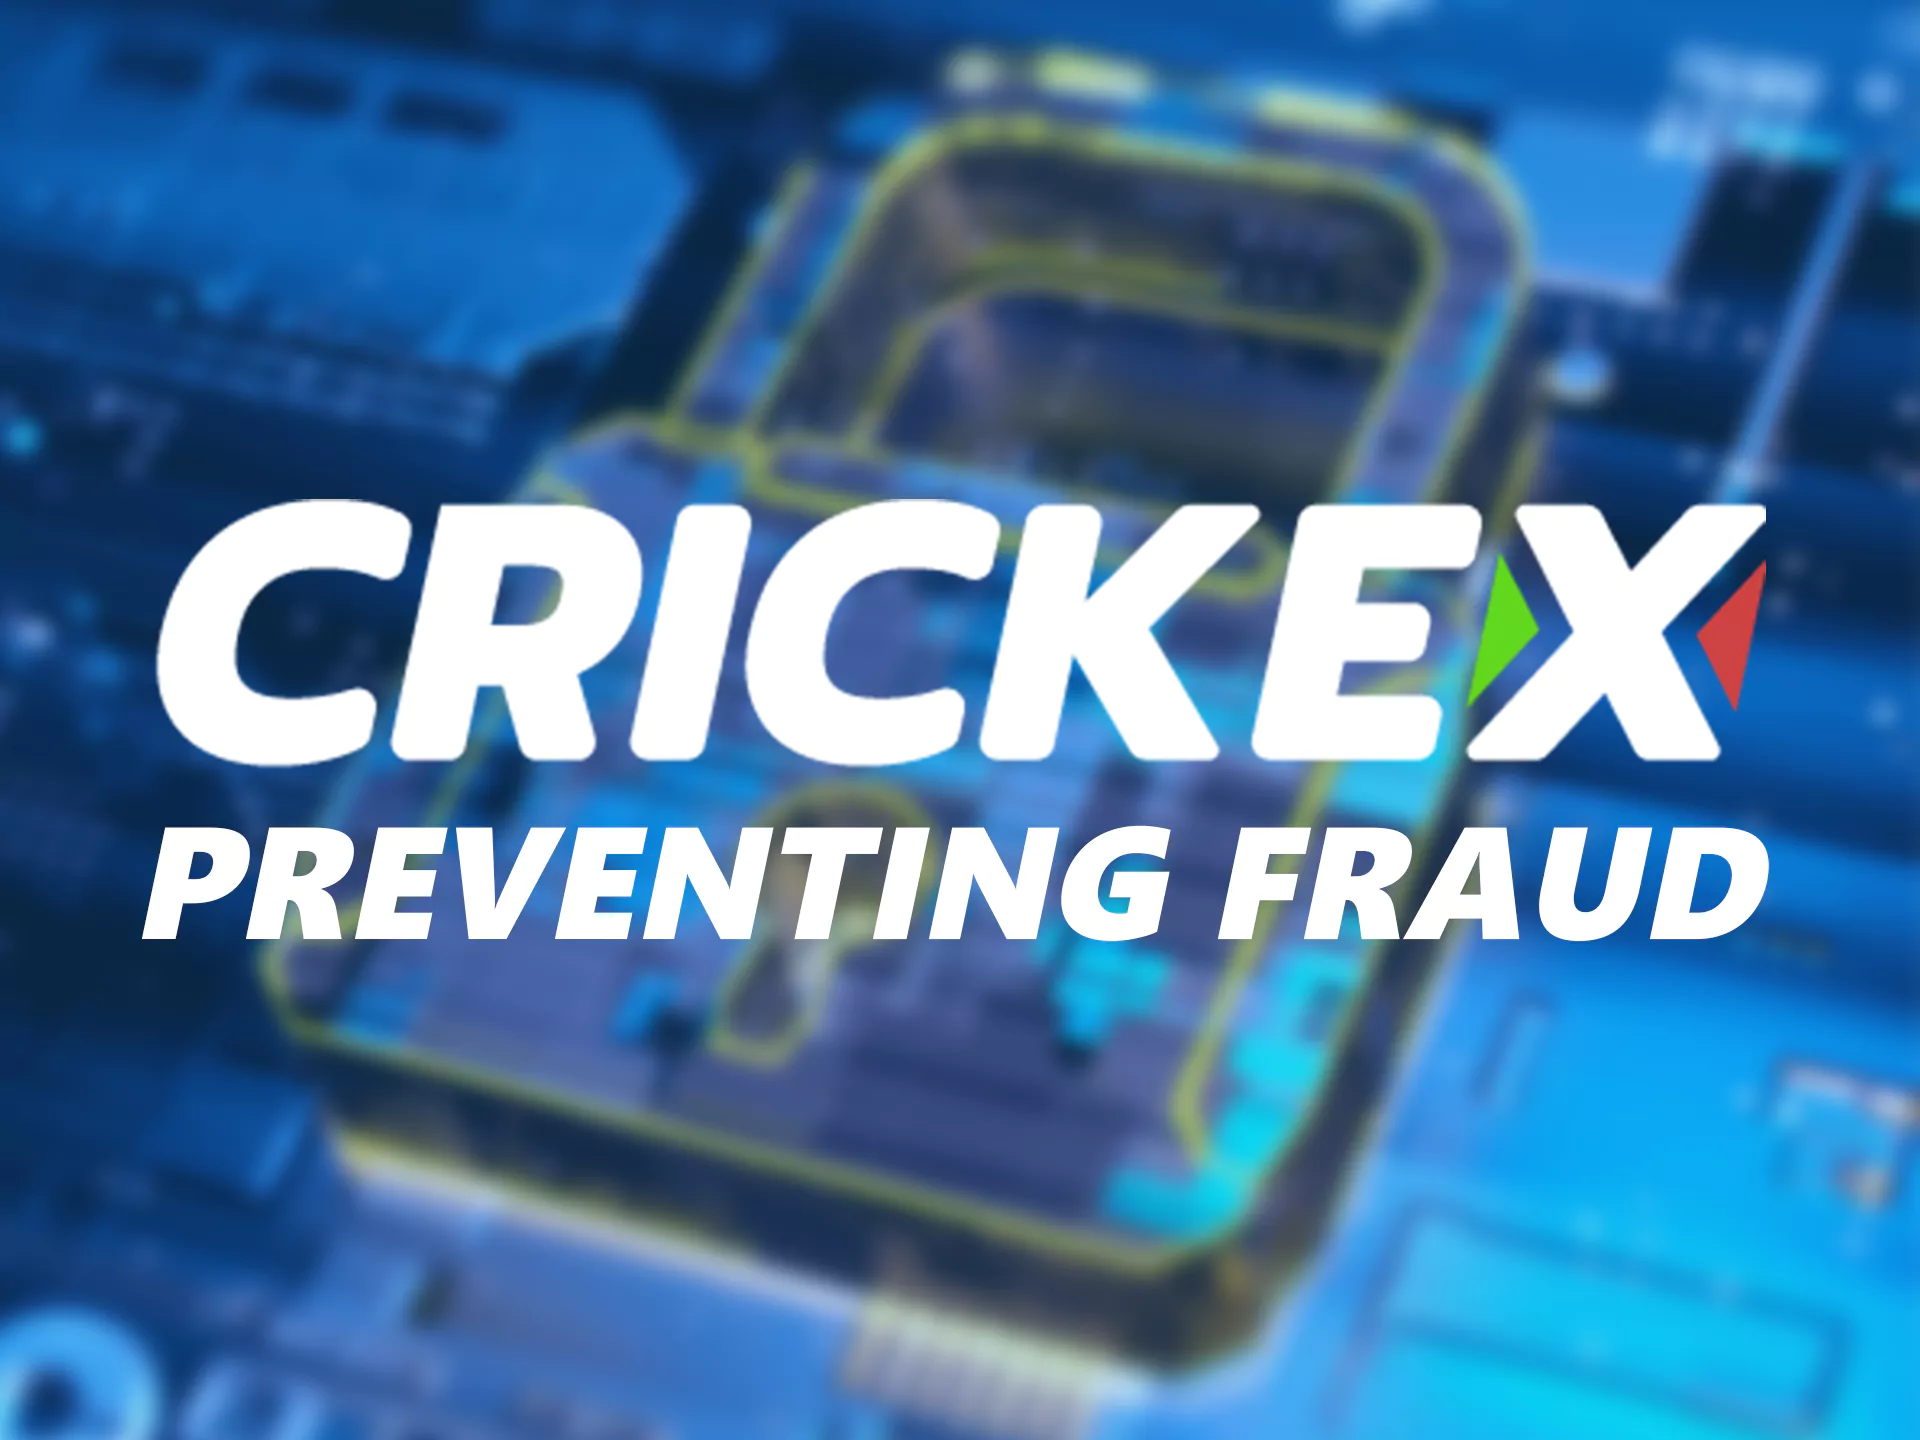 Crickex protects you from fraud.